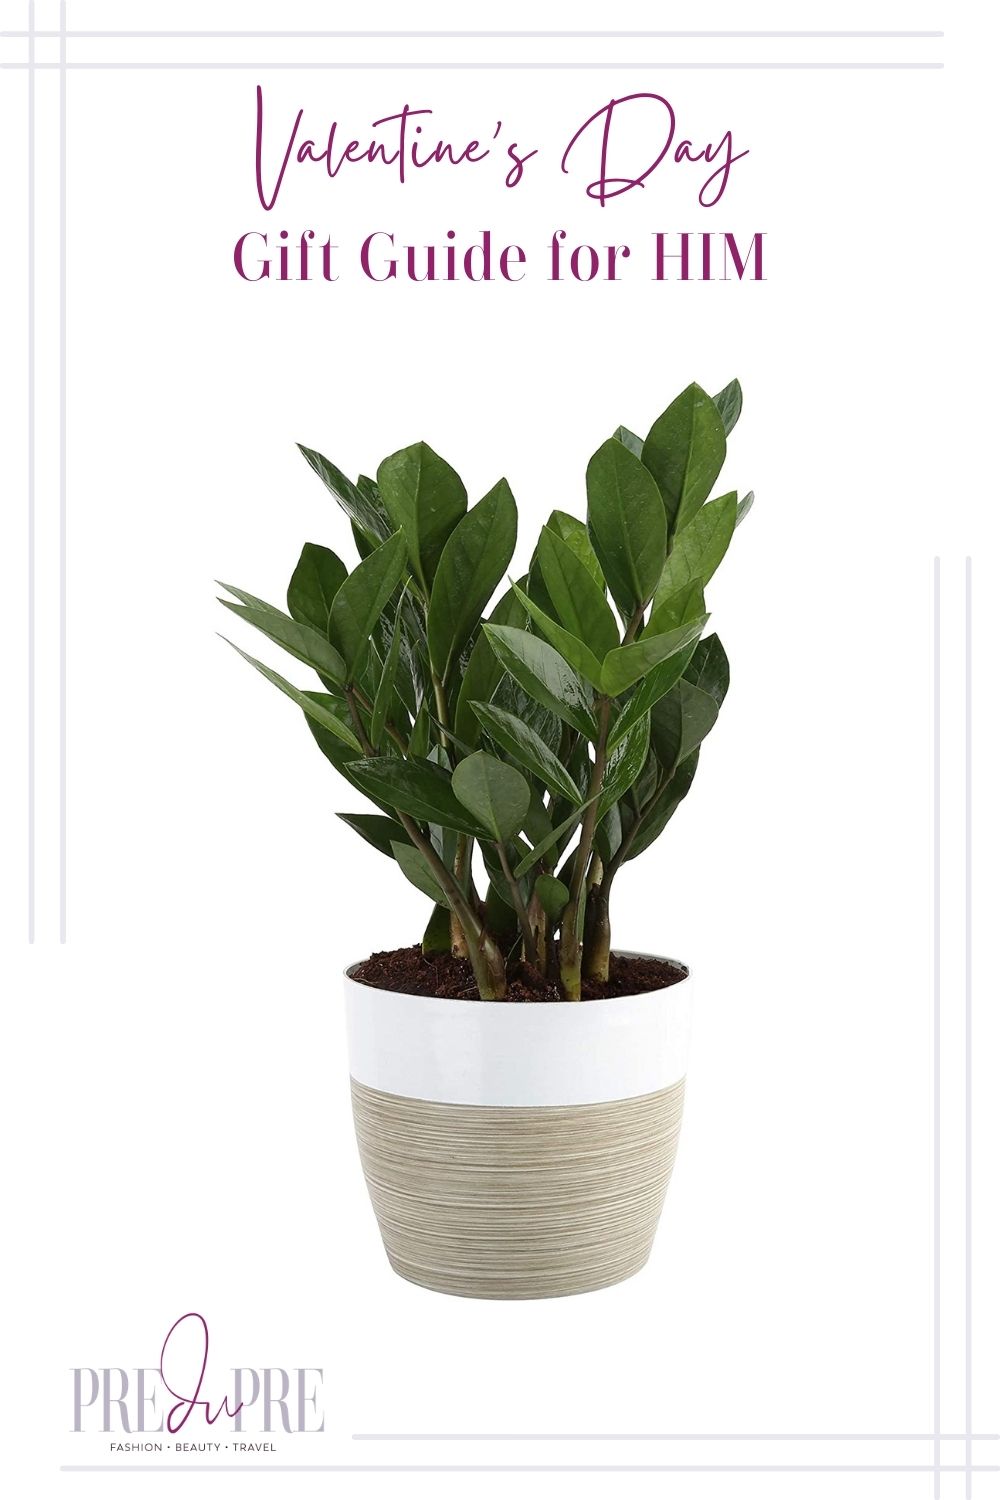 ZZ plant in a white and brown pot image with text in the center top stating "Valentine's Day Gift Guide for Him."